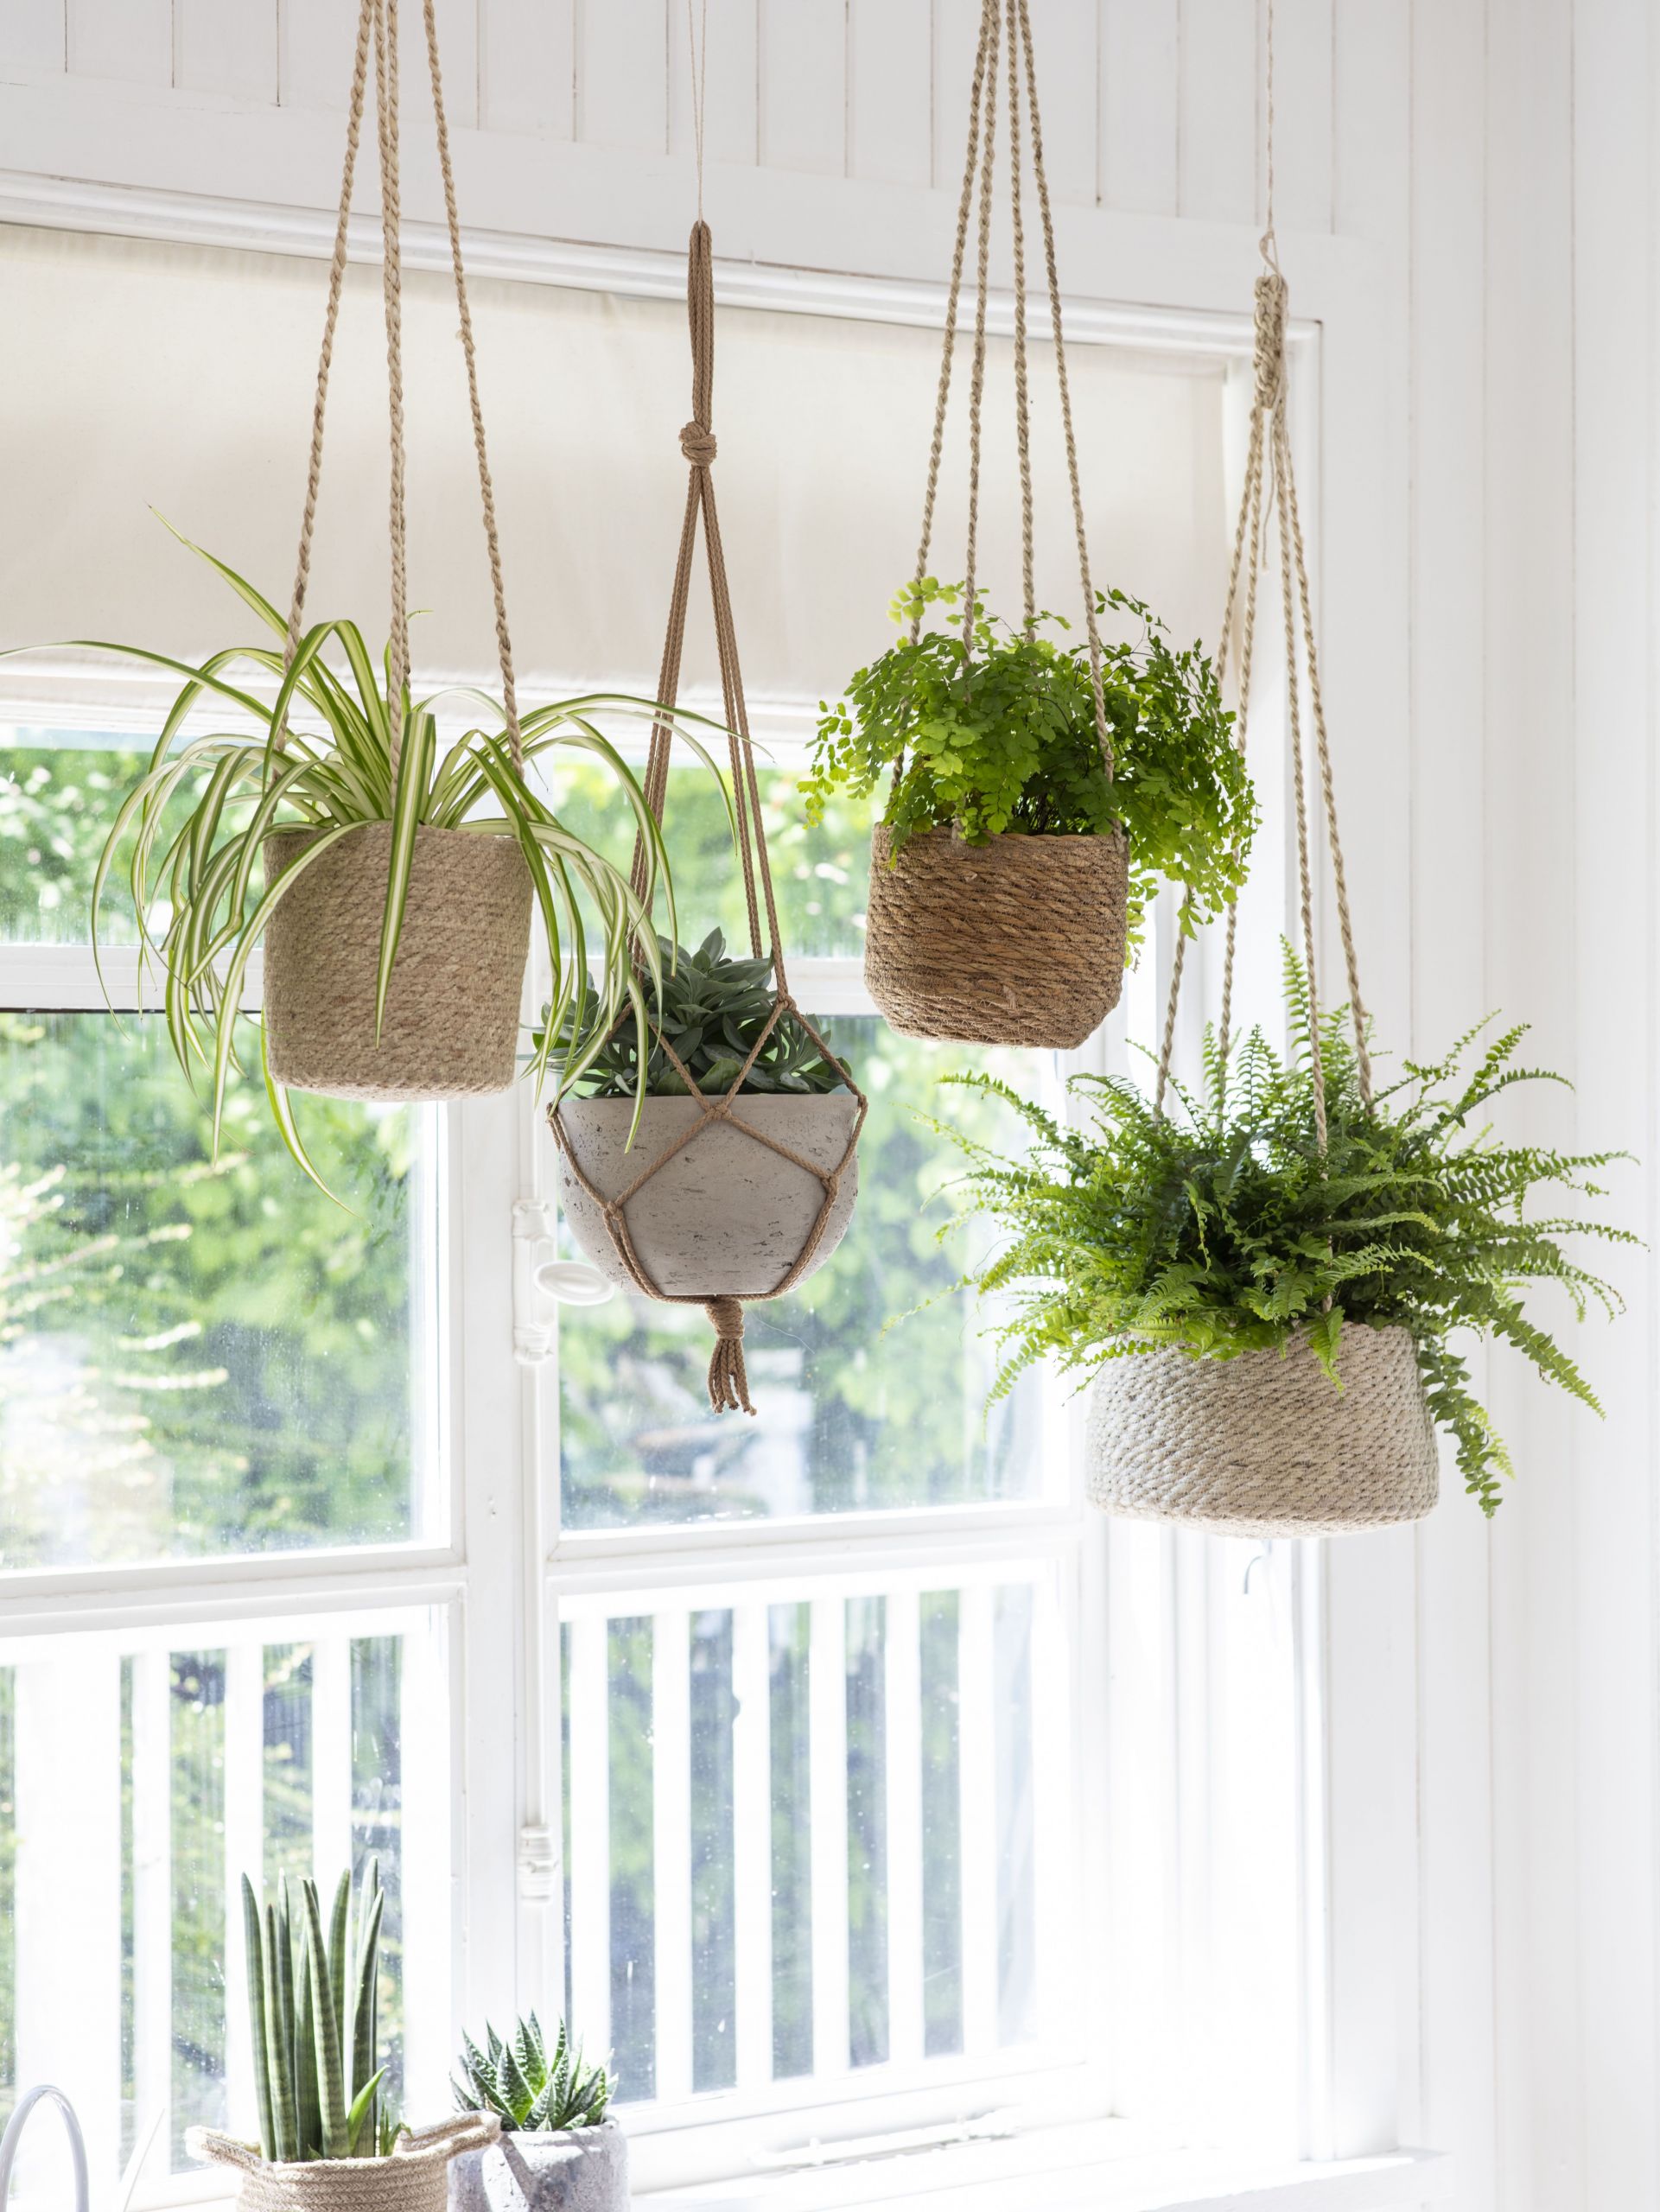 Blumenampel Selber Bauen Einzigartig Our Array Of Hanging Pots From Woven Jute Seagrass and